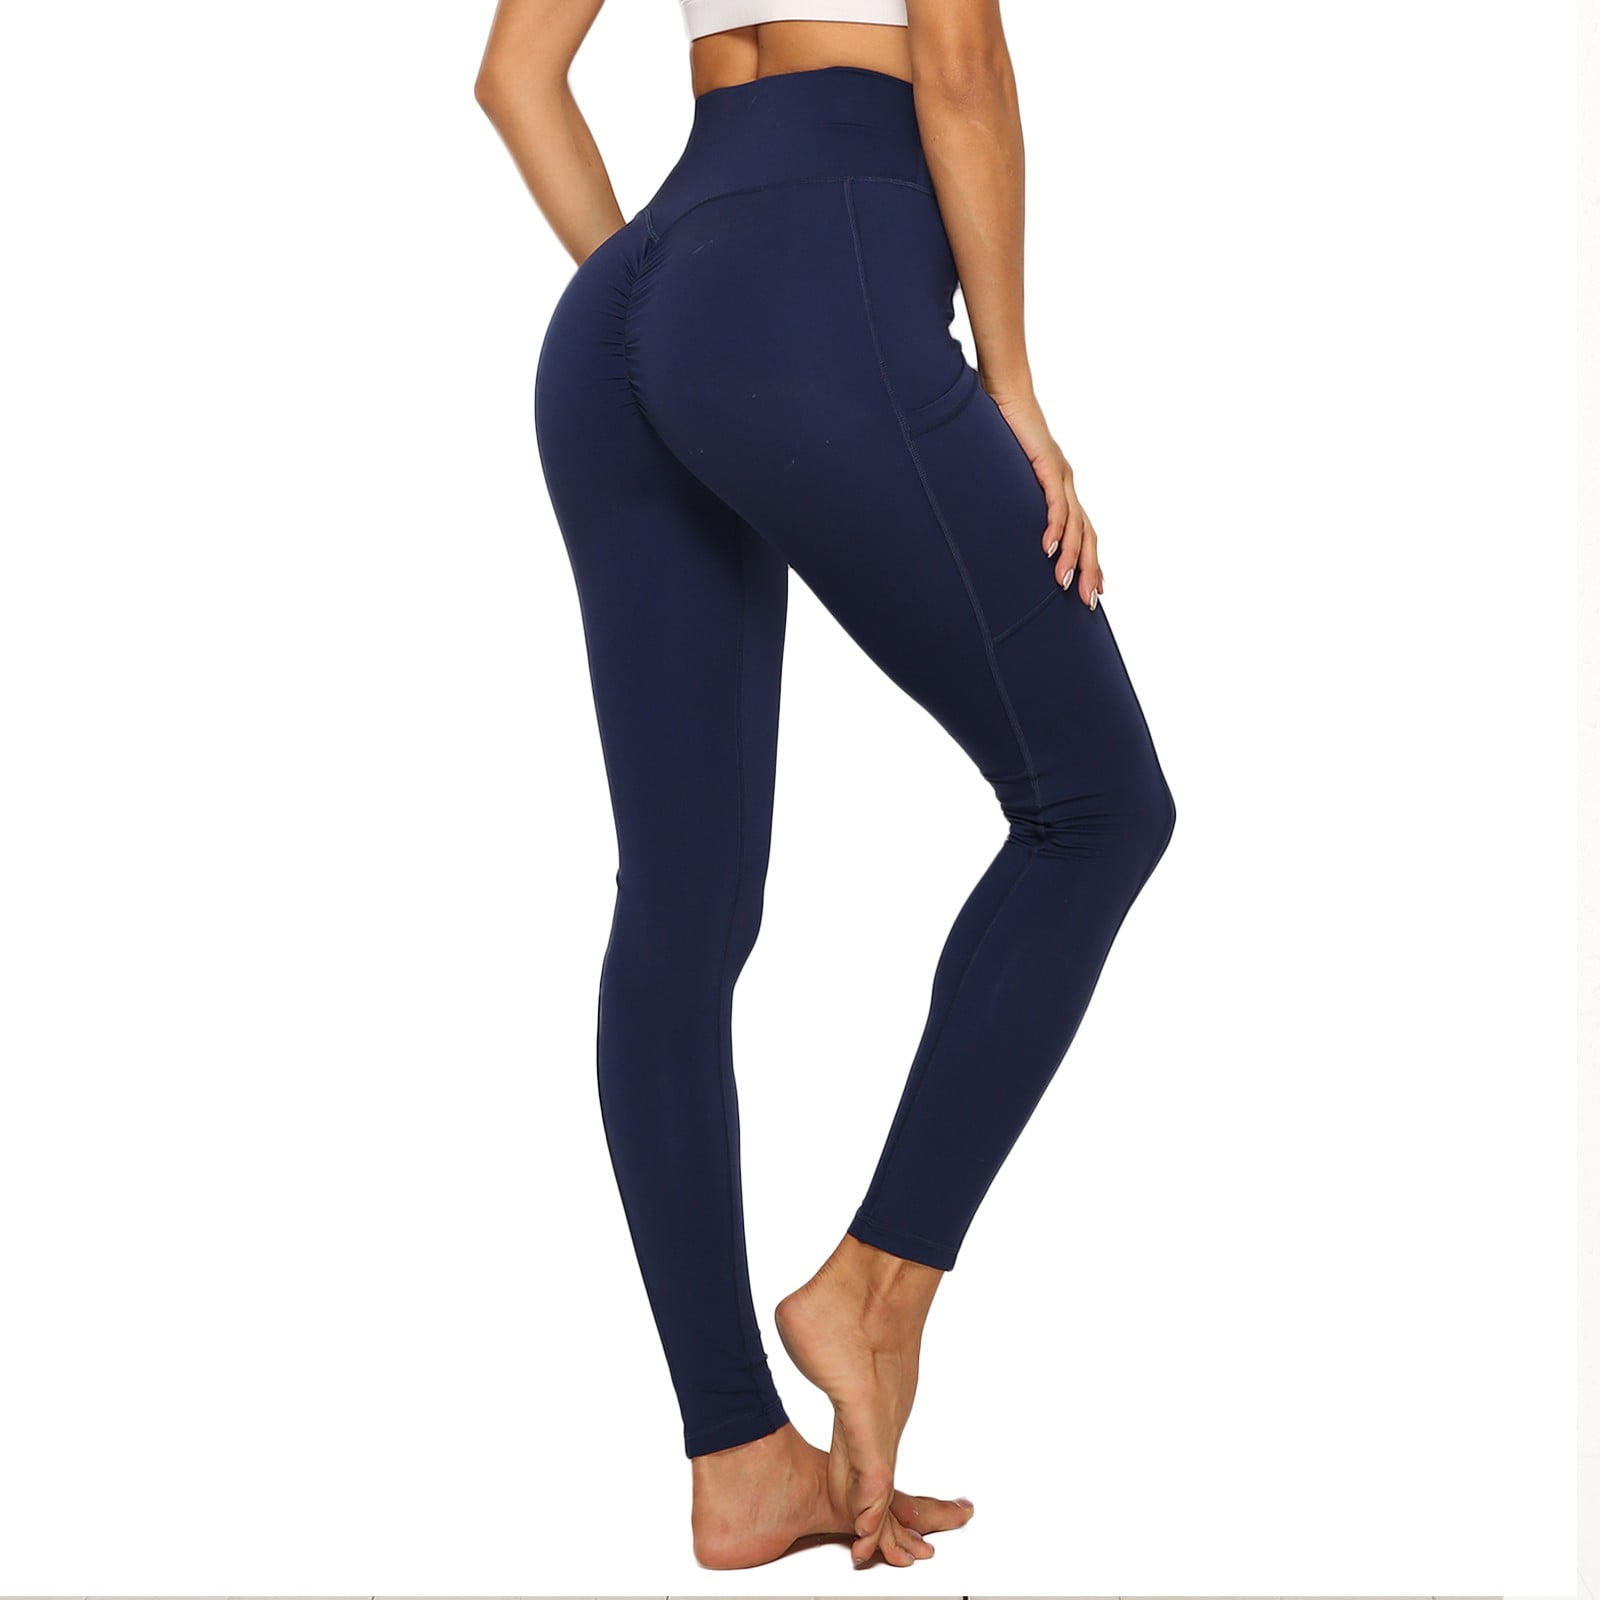 Fittoo - FITTOO Sexy Butt Yoga Pants Sports Leggings Side Pocket ...